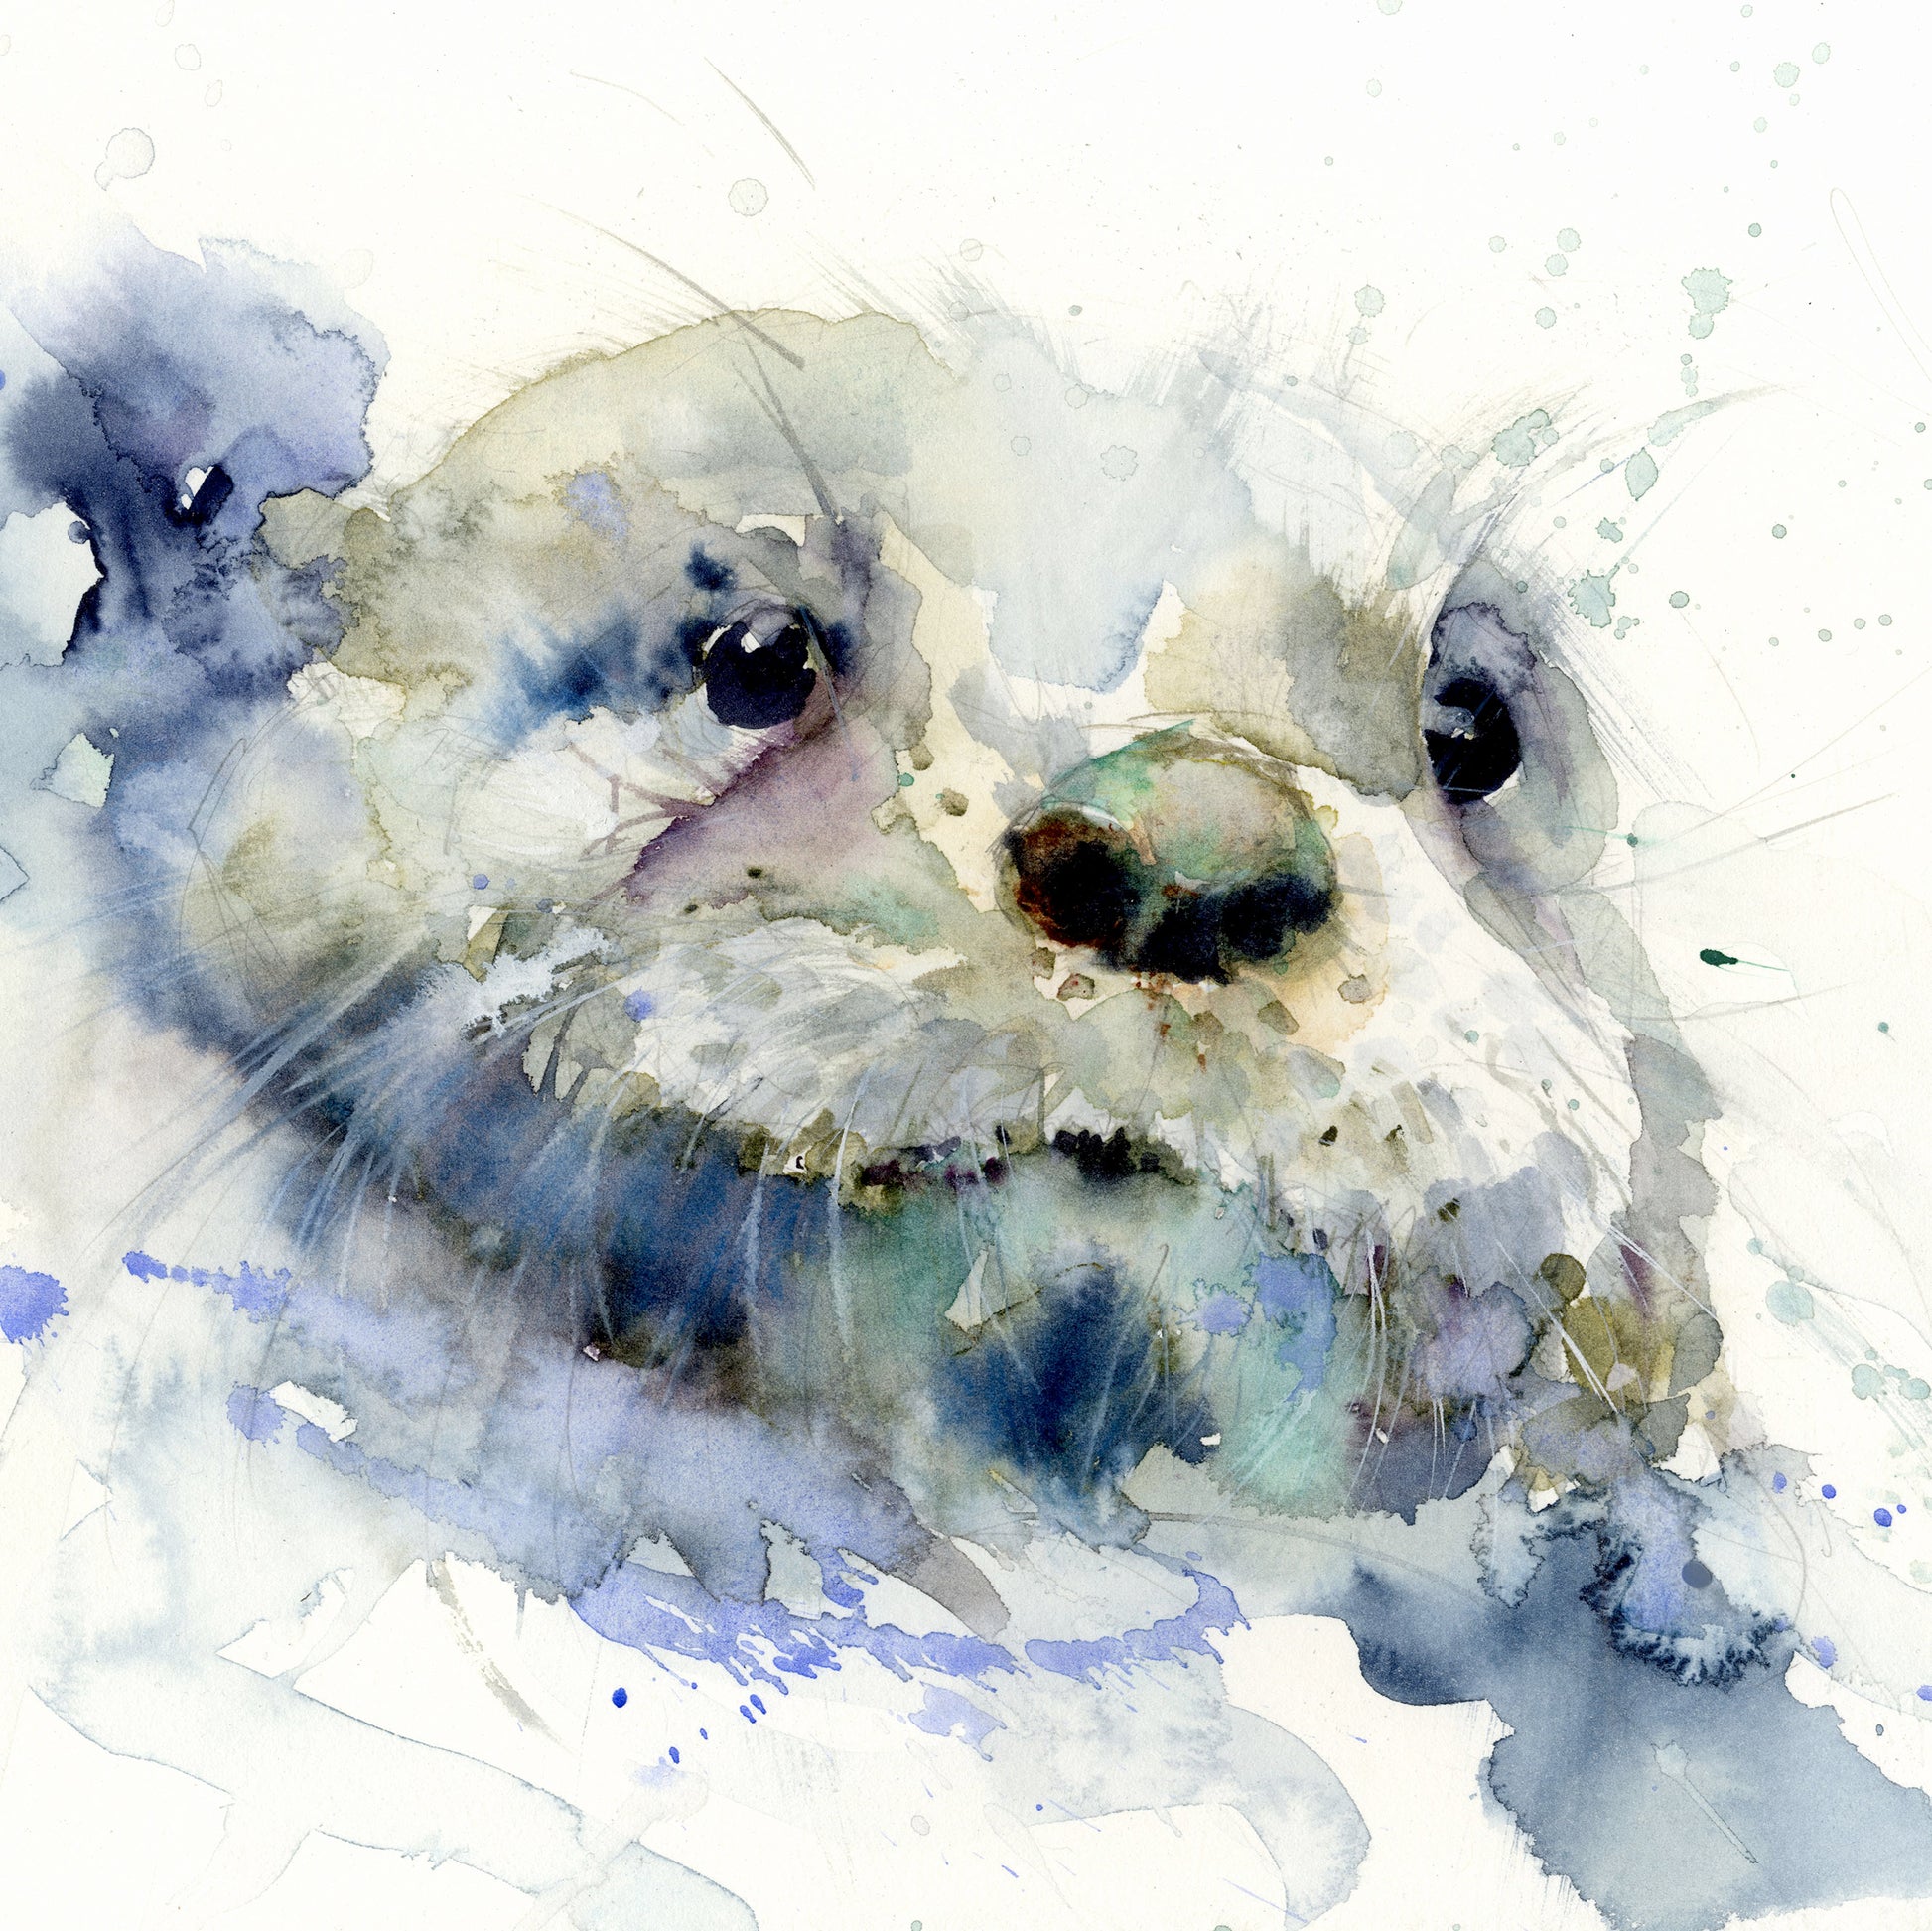 Signed LIMITED EDITION PRINT of  original OTTER  painting "Henry"   - Jen Buckley Art limited edition animal art prints